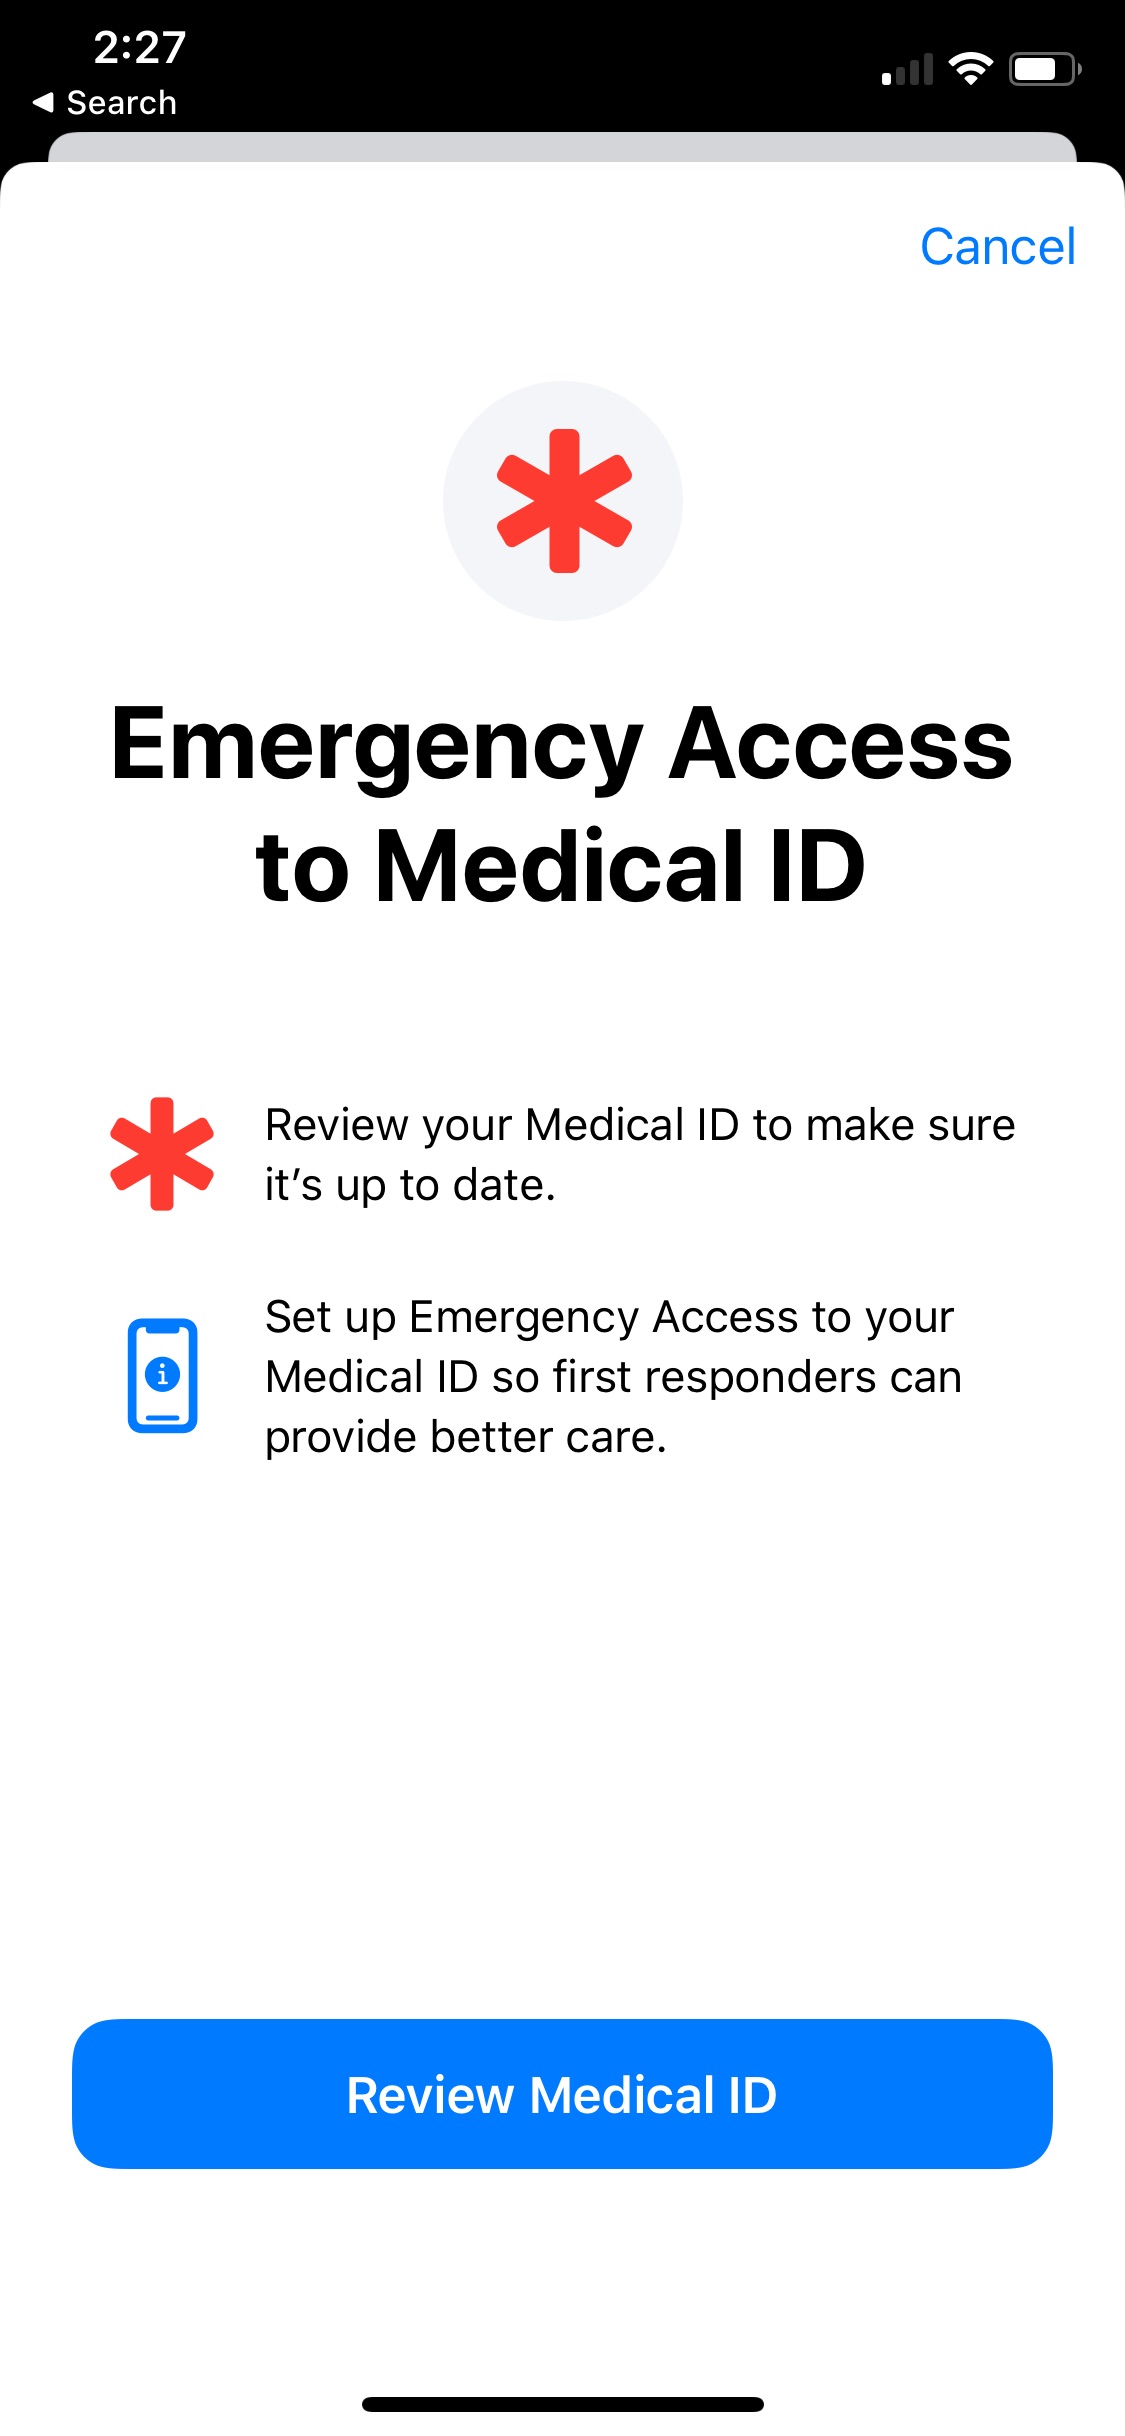 iOS 13.5 Beta 4 Lets You Automatically Share Medical ID Information During an Emergency Call